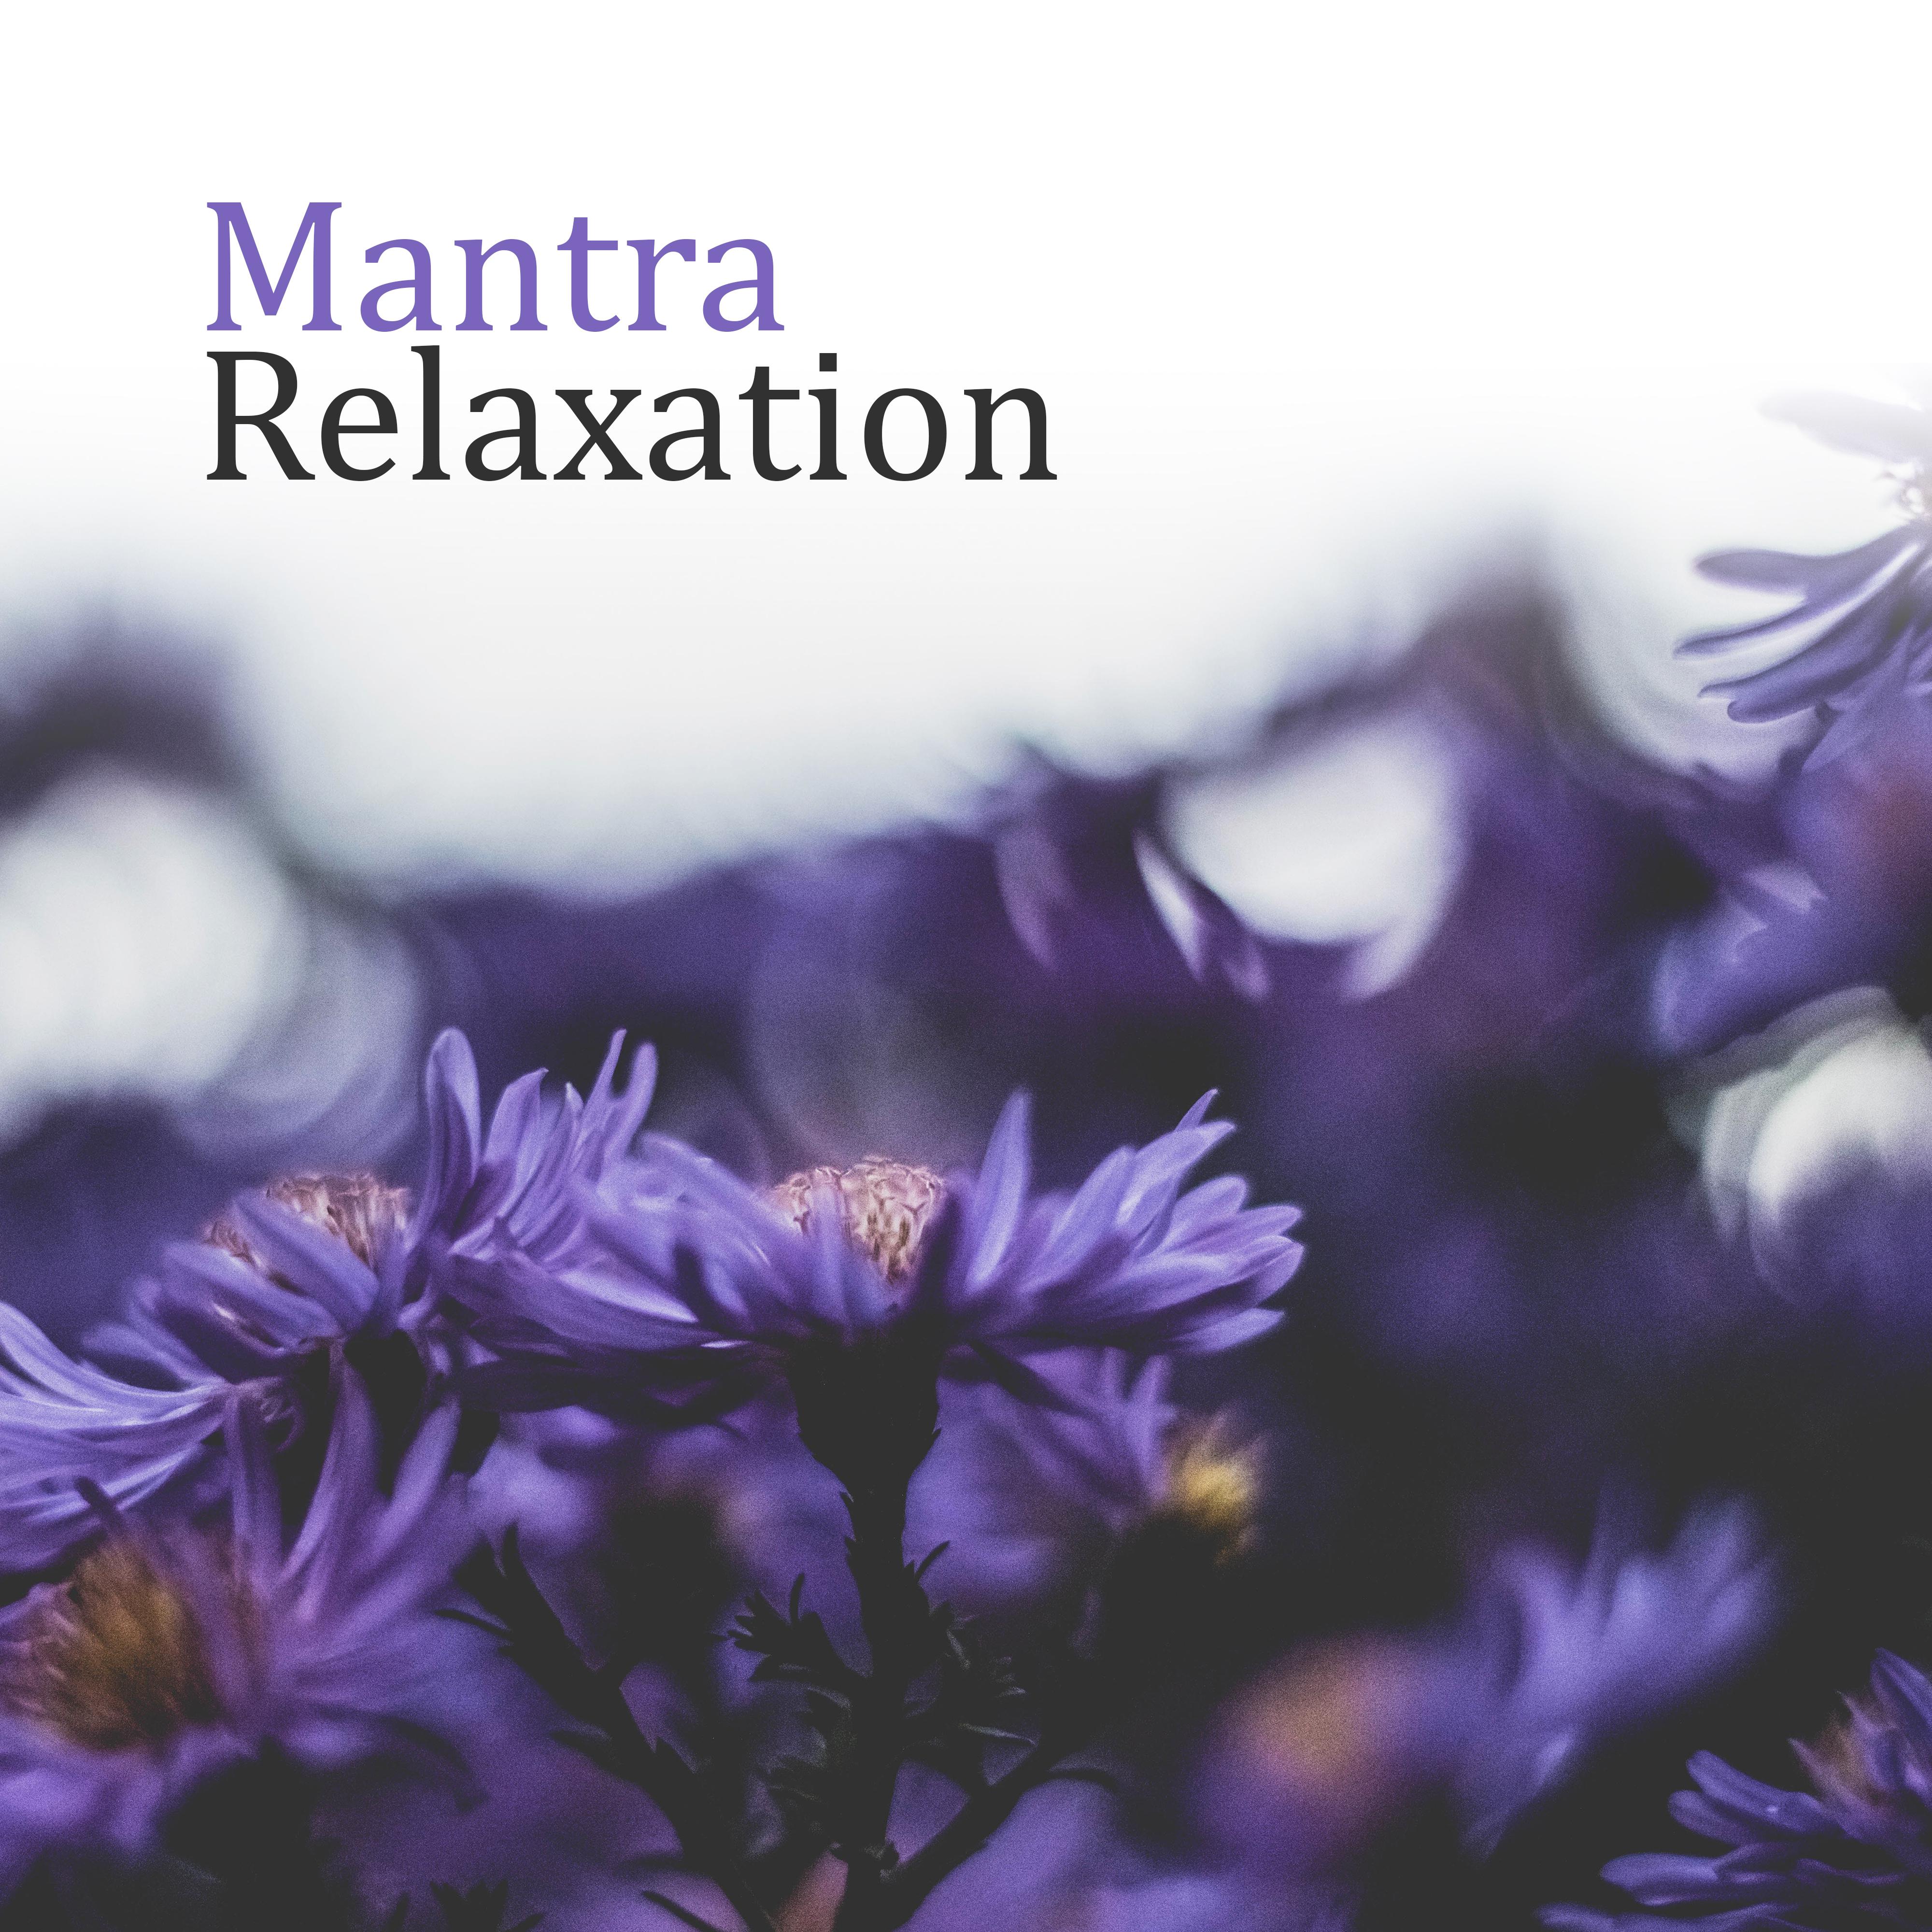 Mantra Relaxation